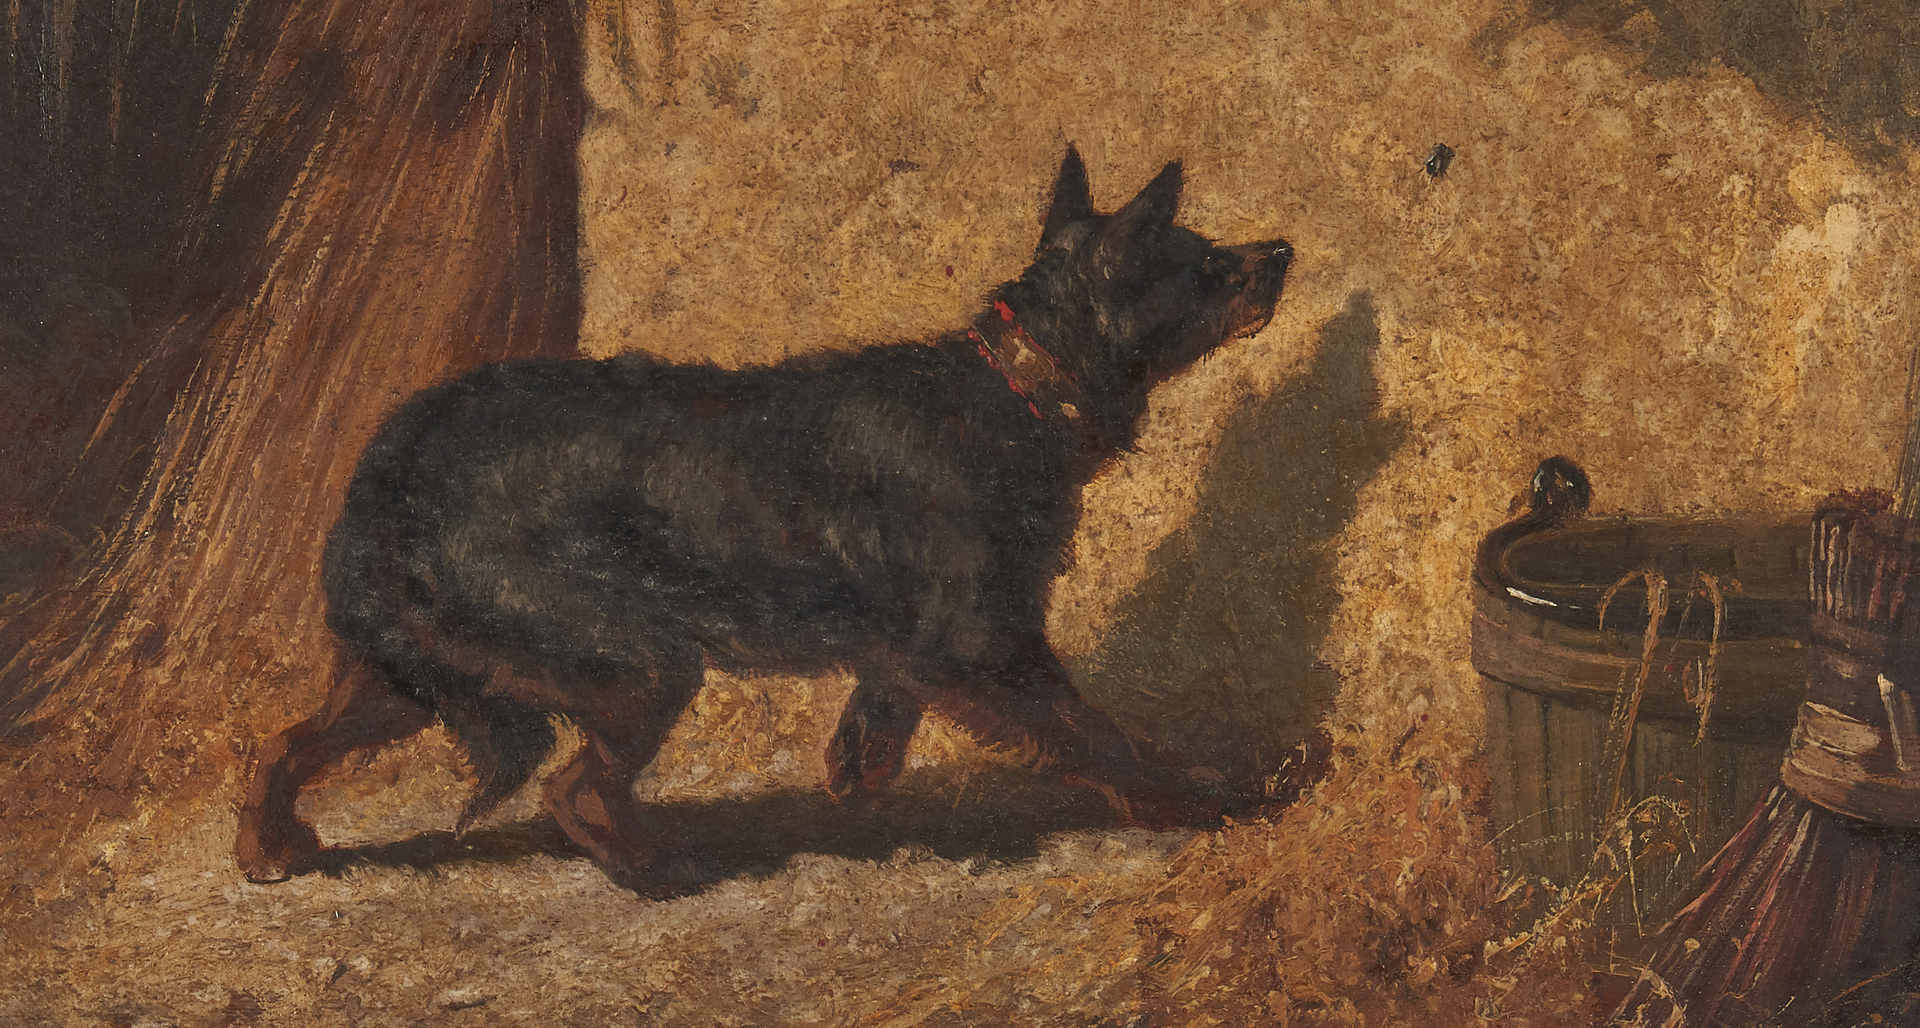 Lot 120: Vincent de Vos O/P, Dog With Insect